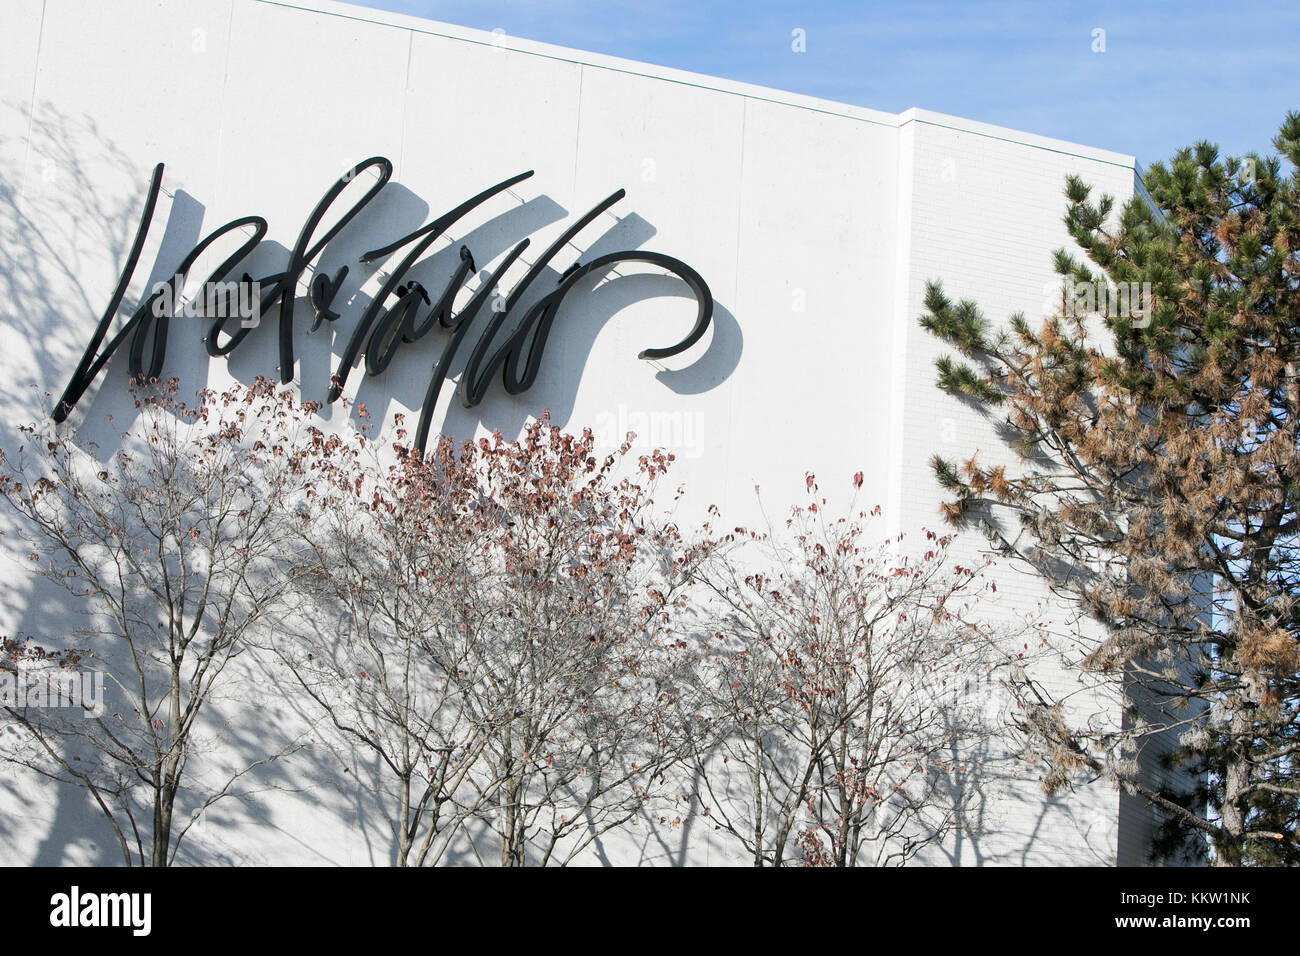 A logo sign outside of a Lord & Taylor retail store in Fairfax